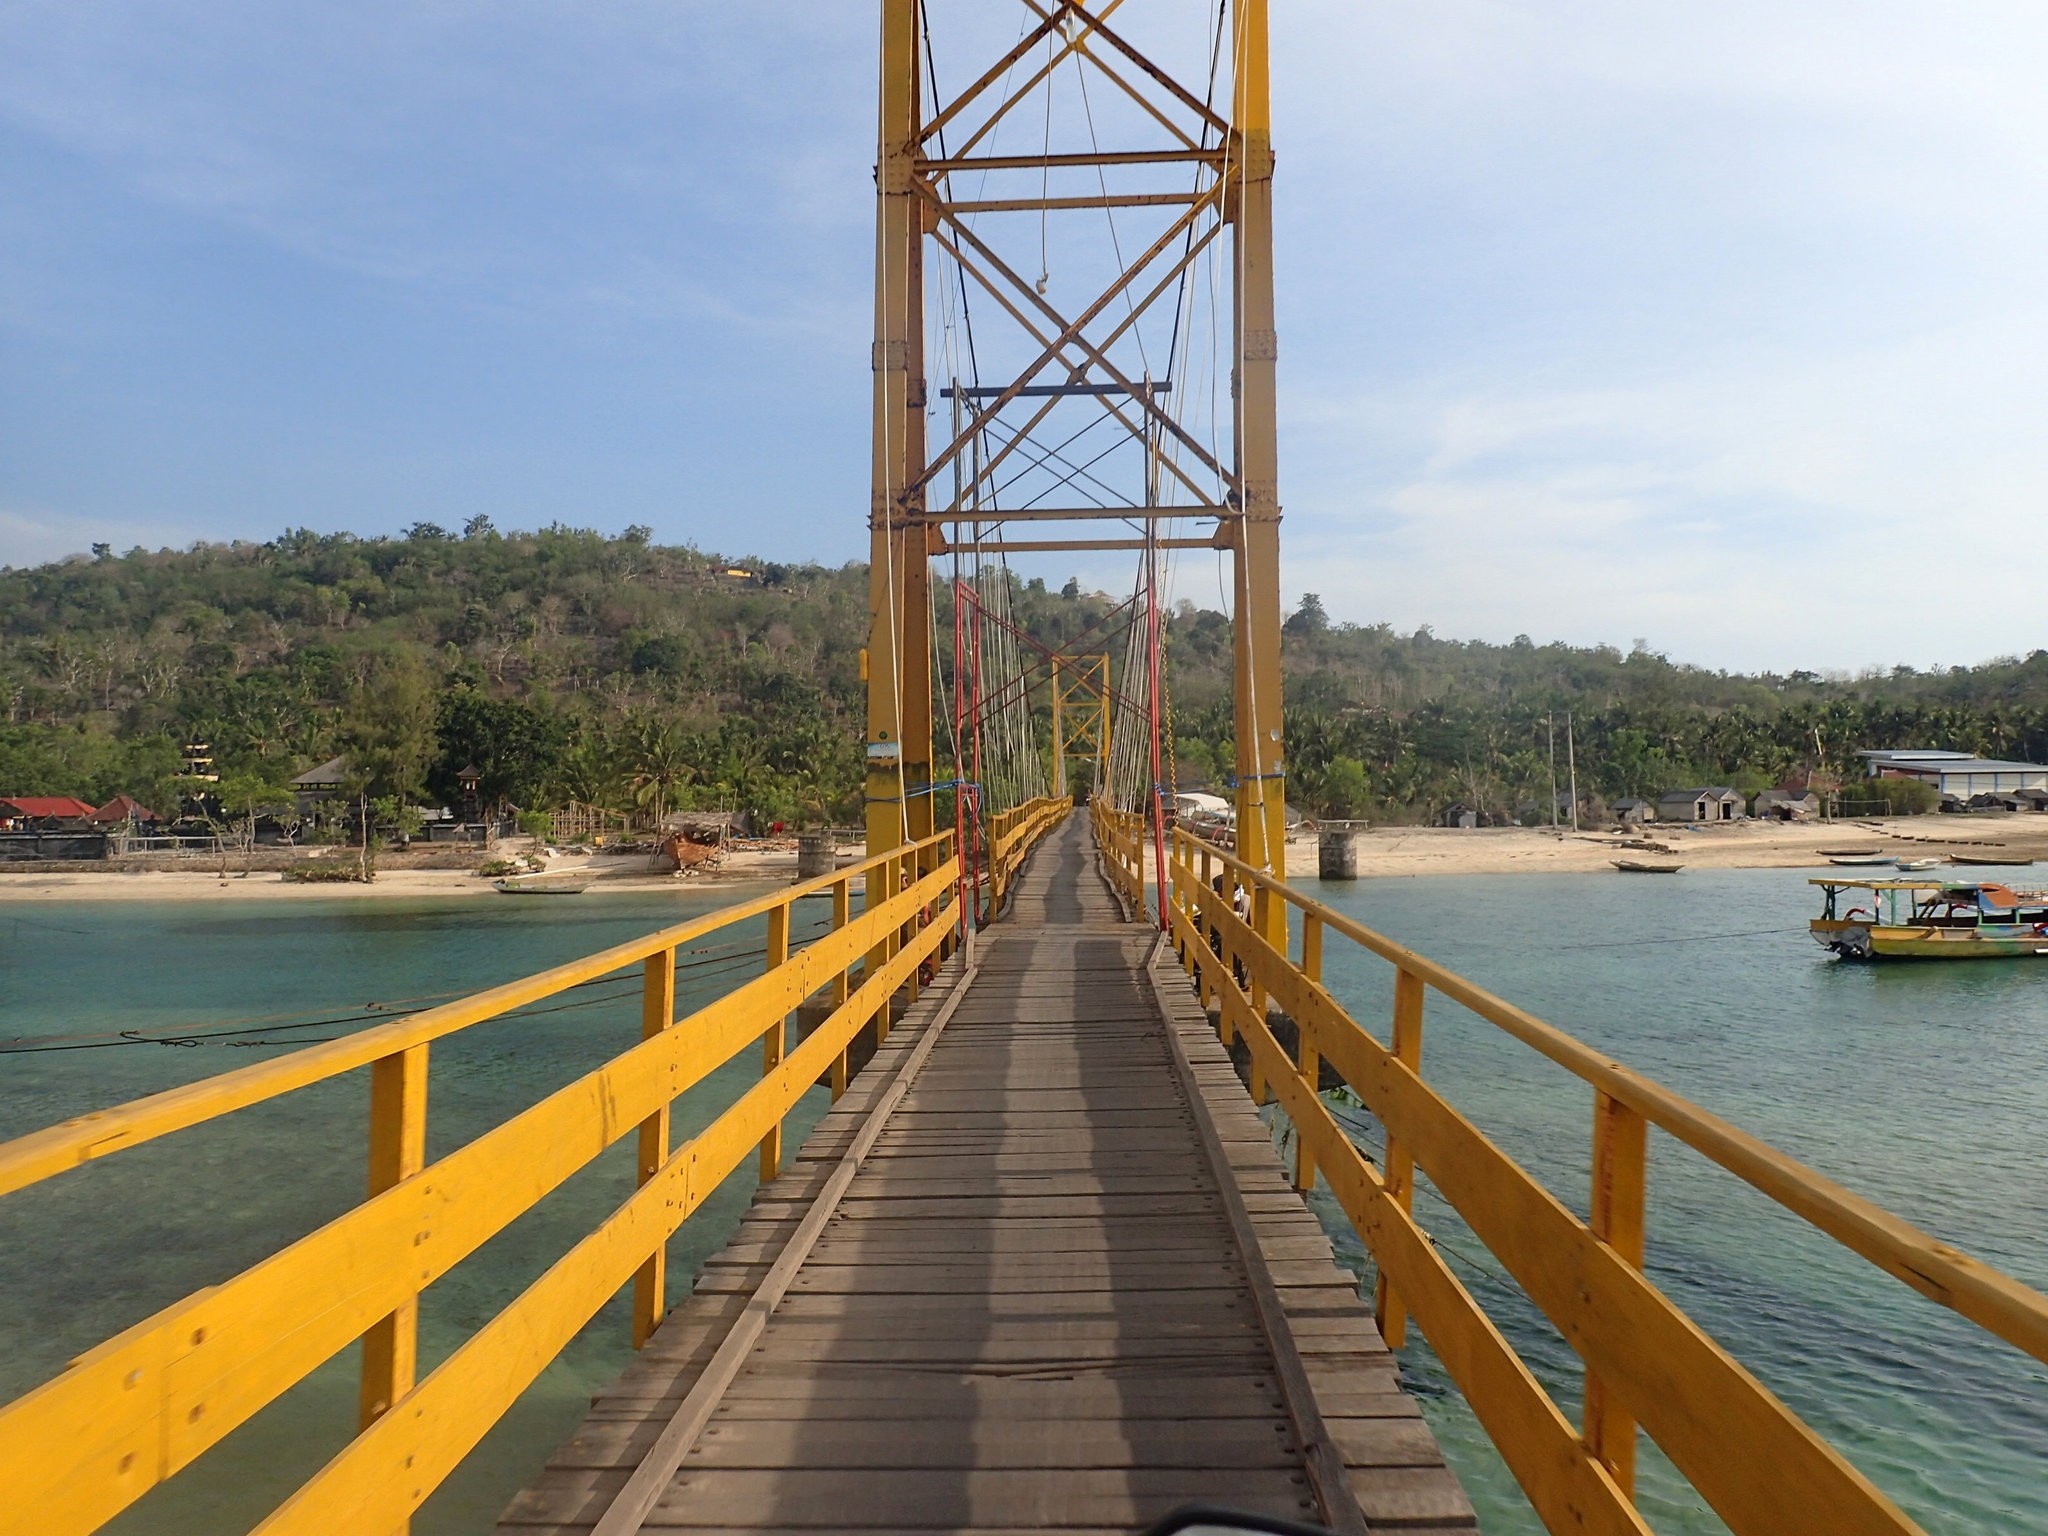 The ,Yellow Bridge, which connects Nusa Lembongan and Nusa Ceningan, two islands located east of the resort island of Bali, Indonesia. (Reuters Photo)